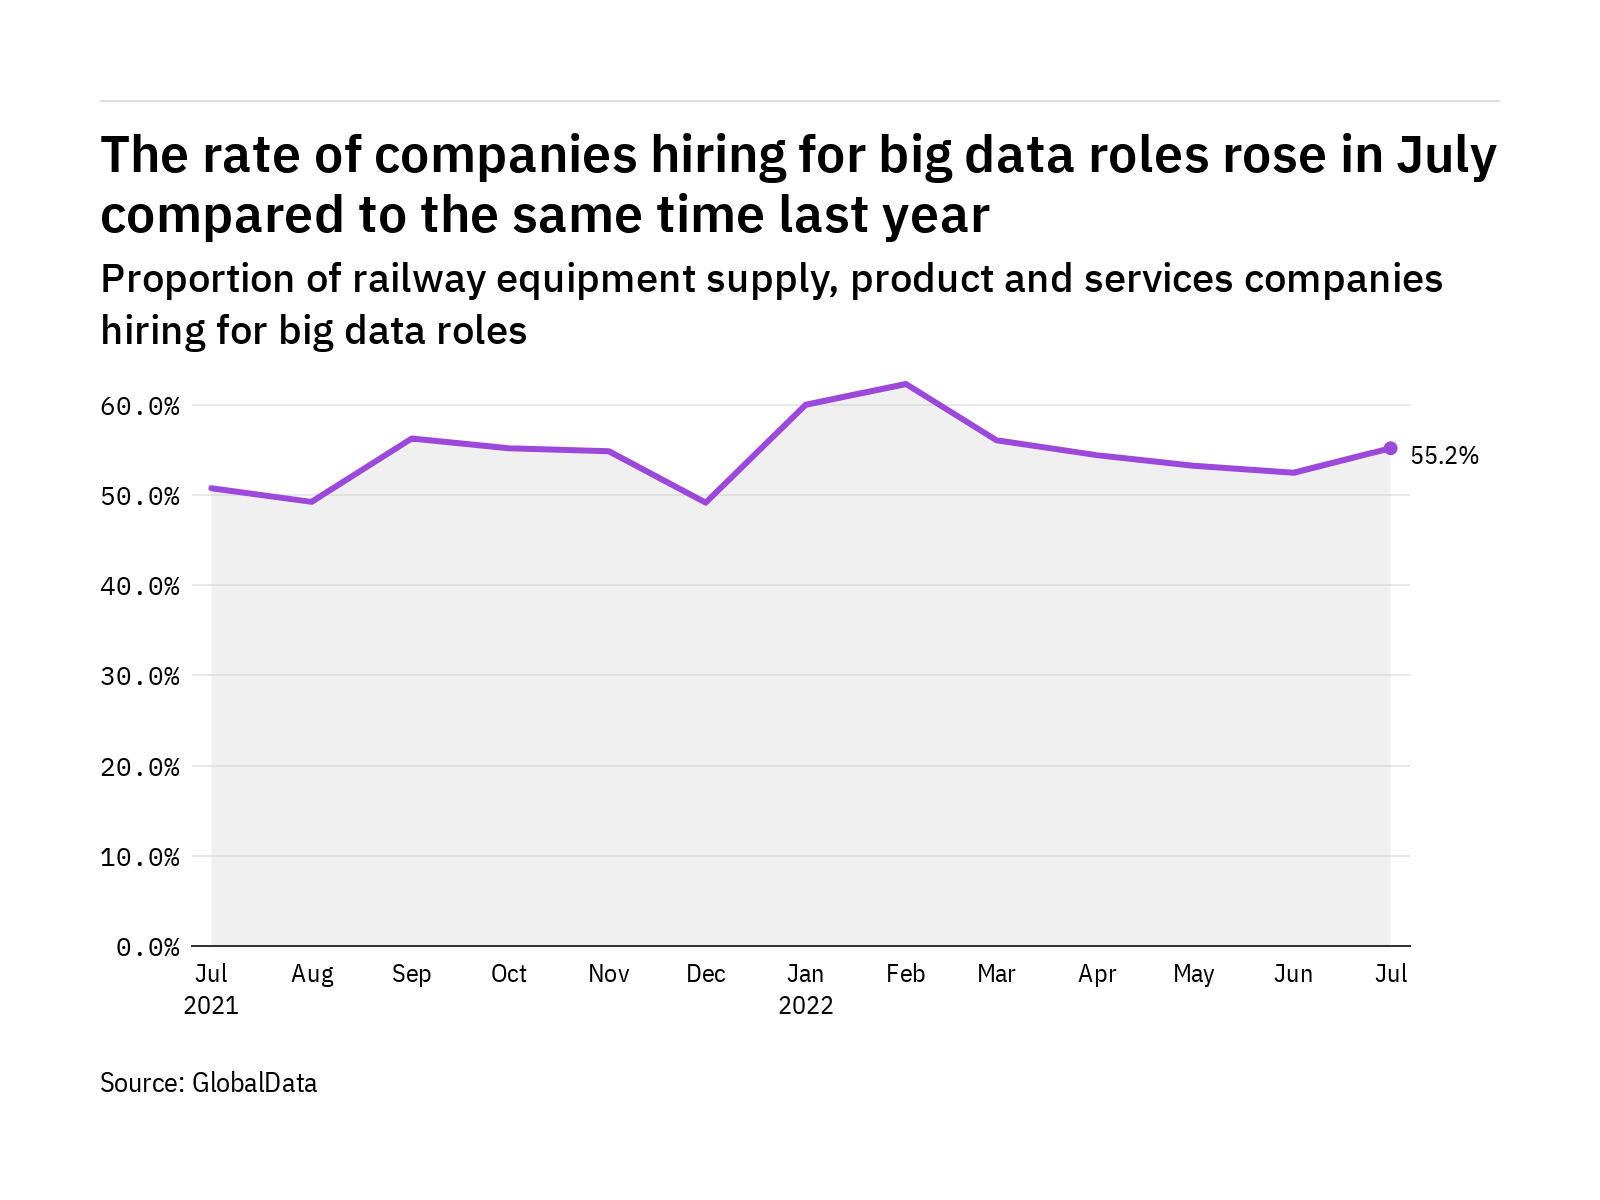 Big data hiring levels in the railway industry rose in July 2022